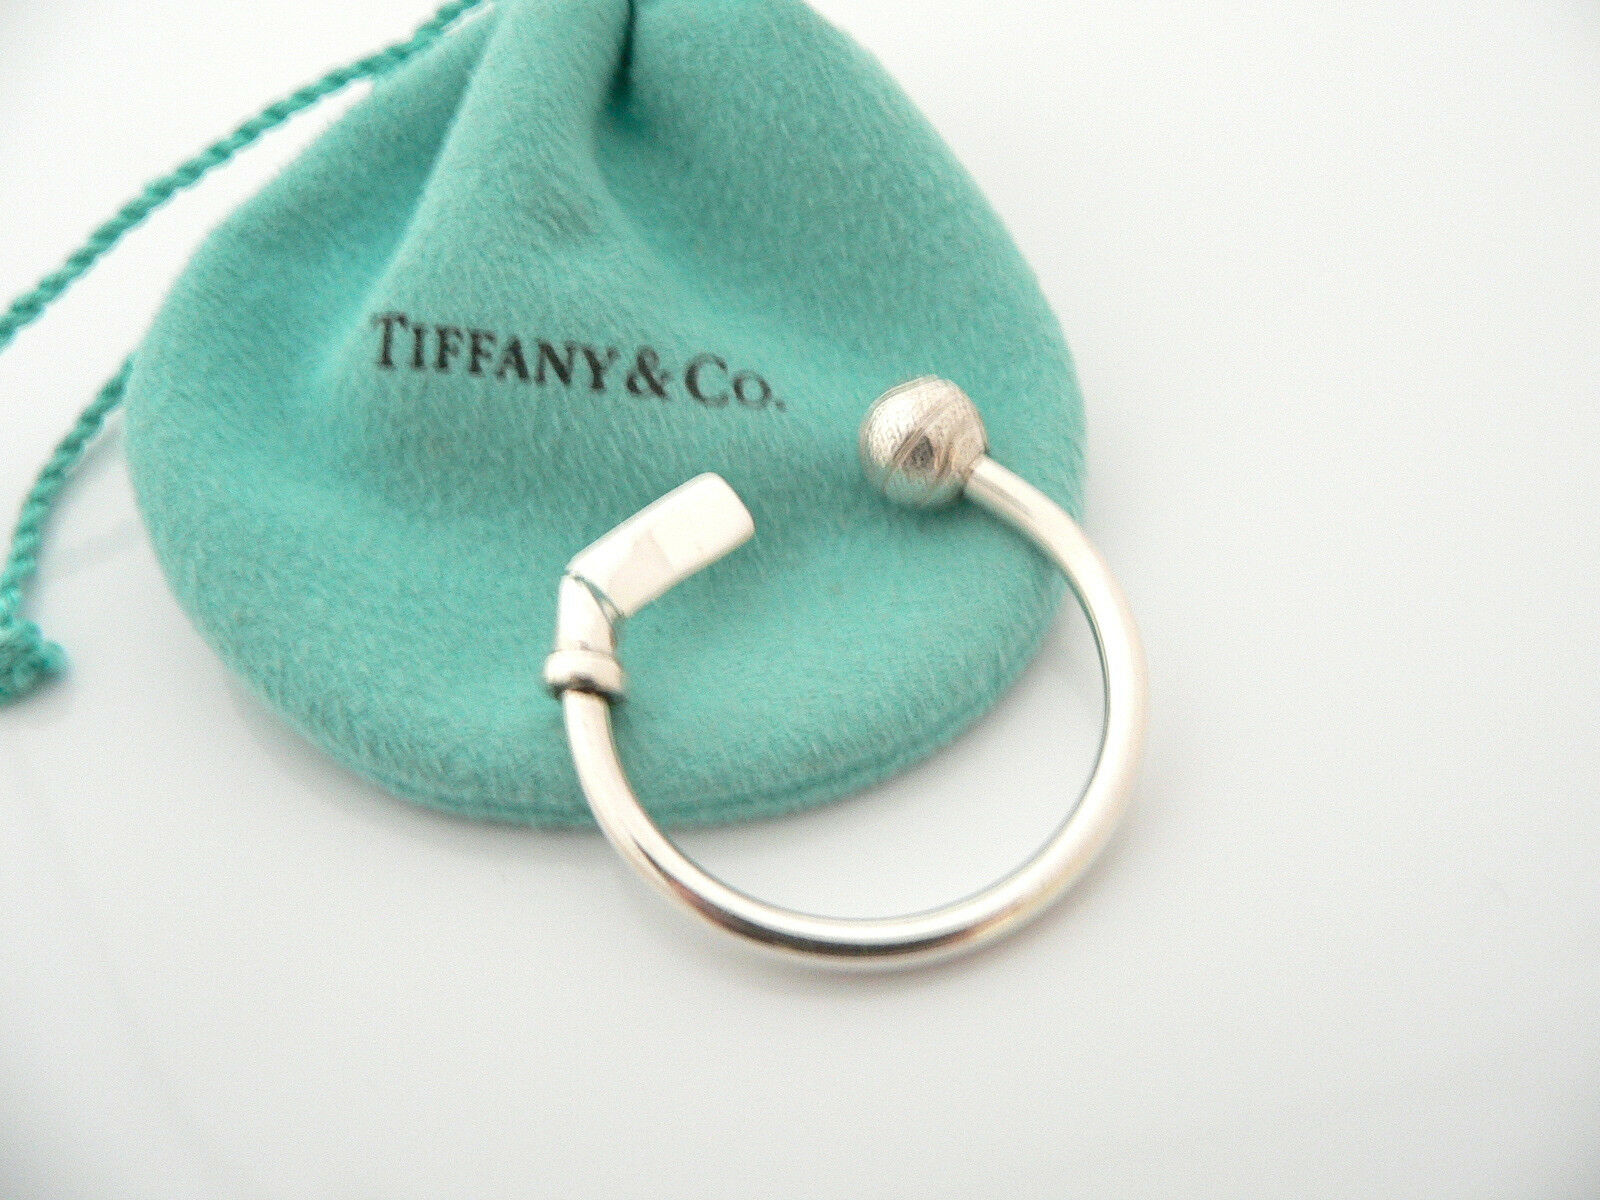 Tiffany & Co Silver Basketball Ball Key Ring Keychain Sports Lover Gift Pouch